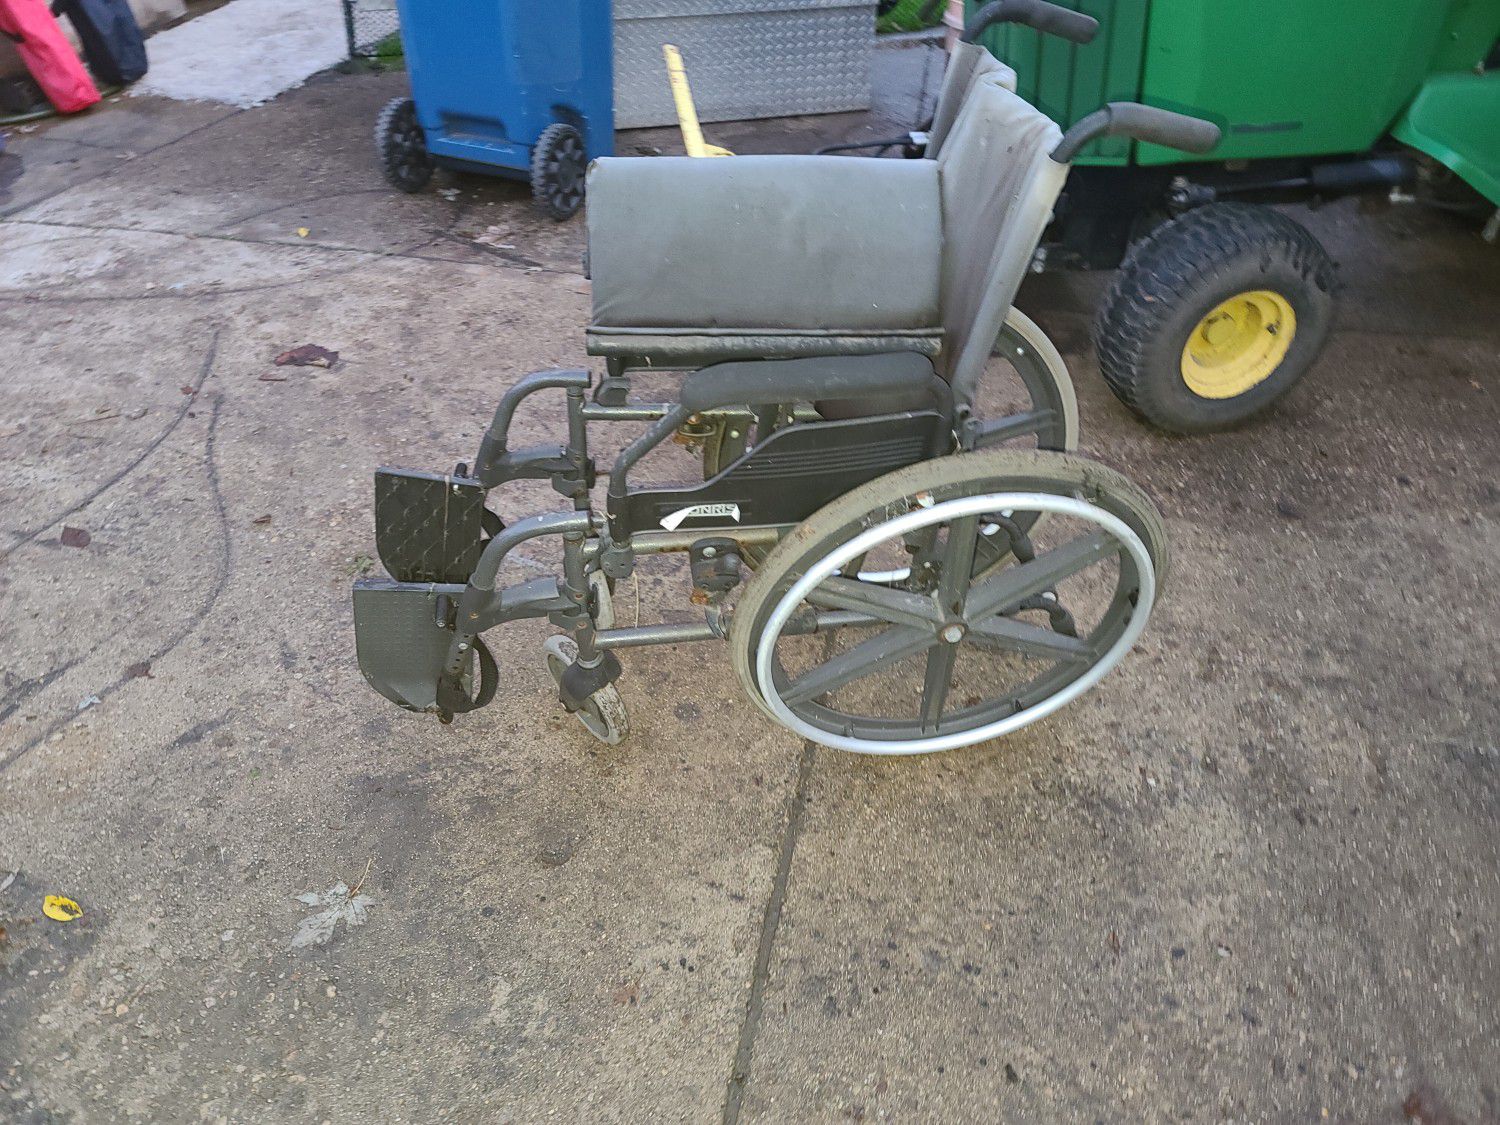 I have a wheelchair for sale